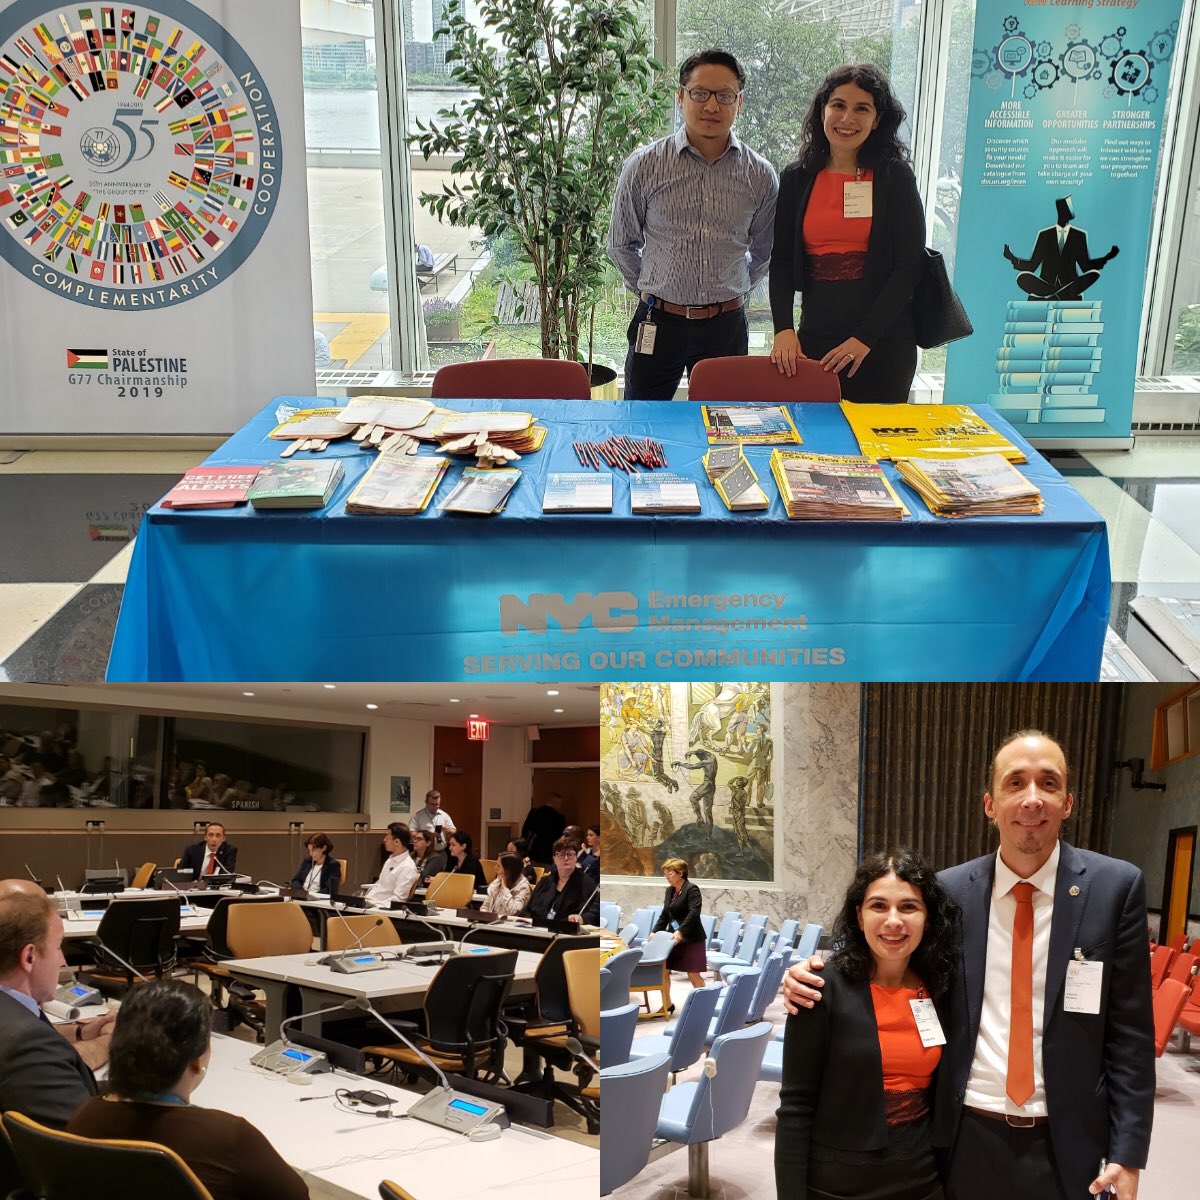 .@nycemergencymgt's Ready New York team enjoyed speaking to @UN staff this week about how we prepare NYC for emergencies.